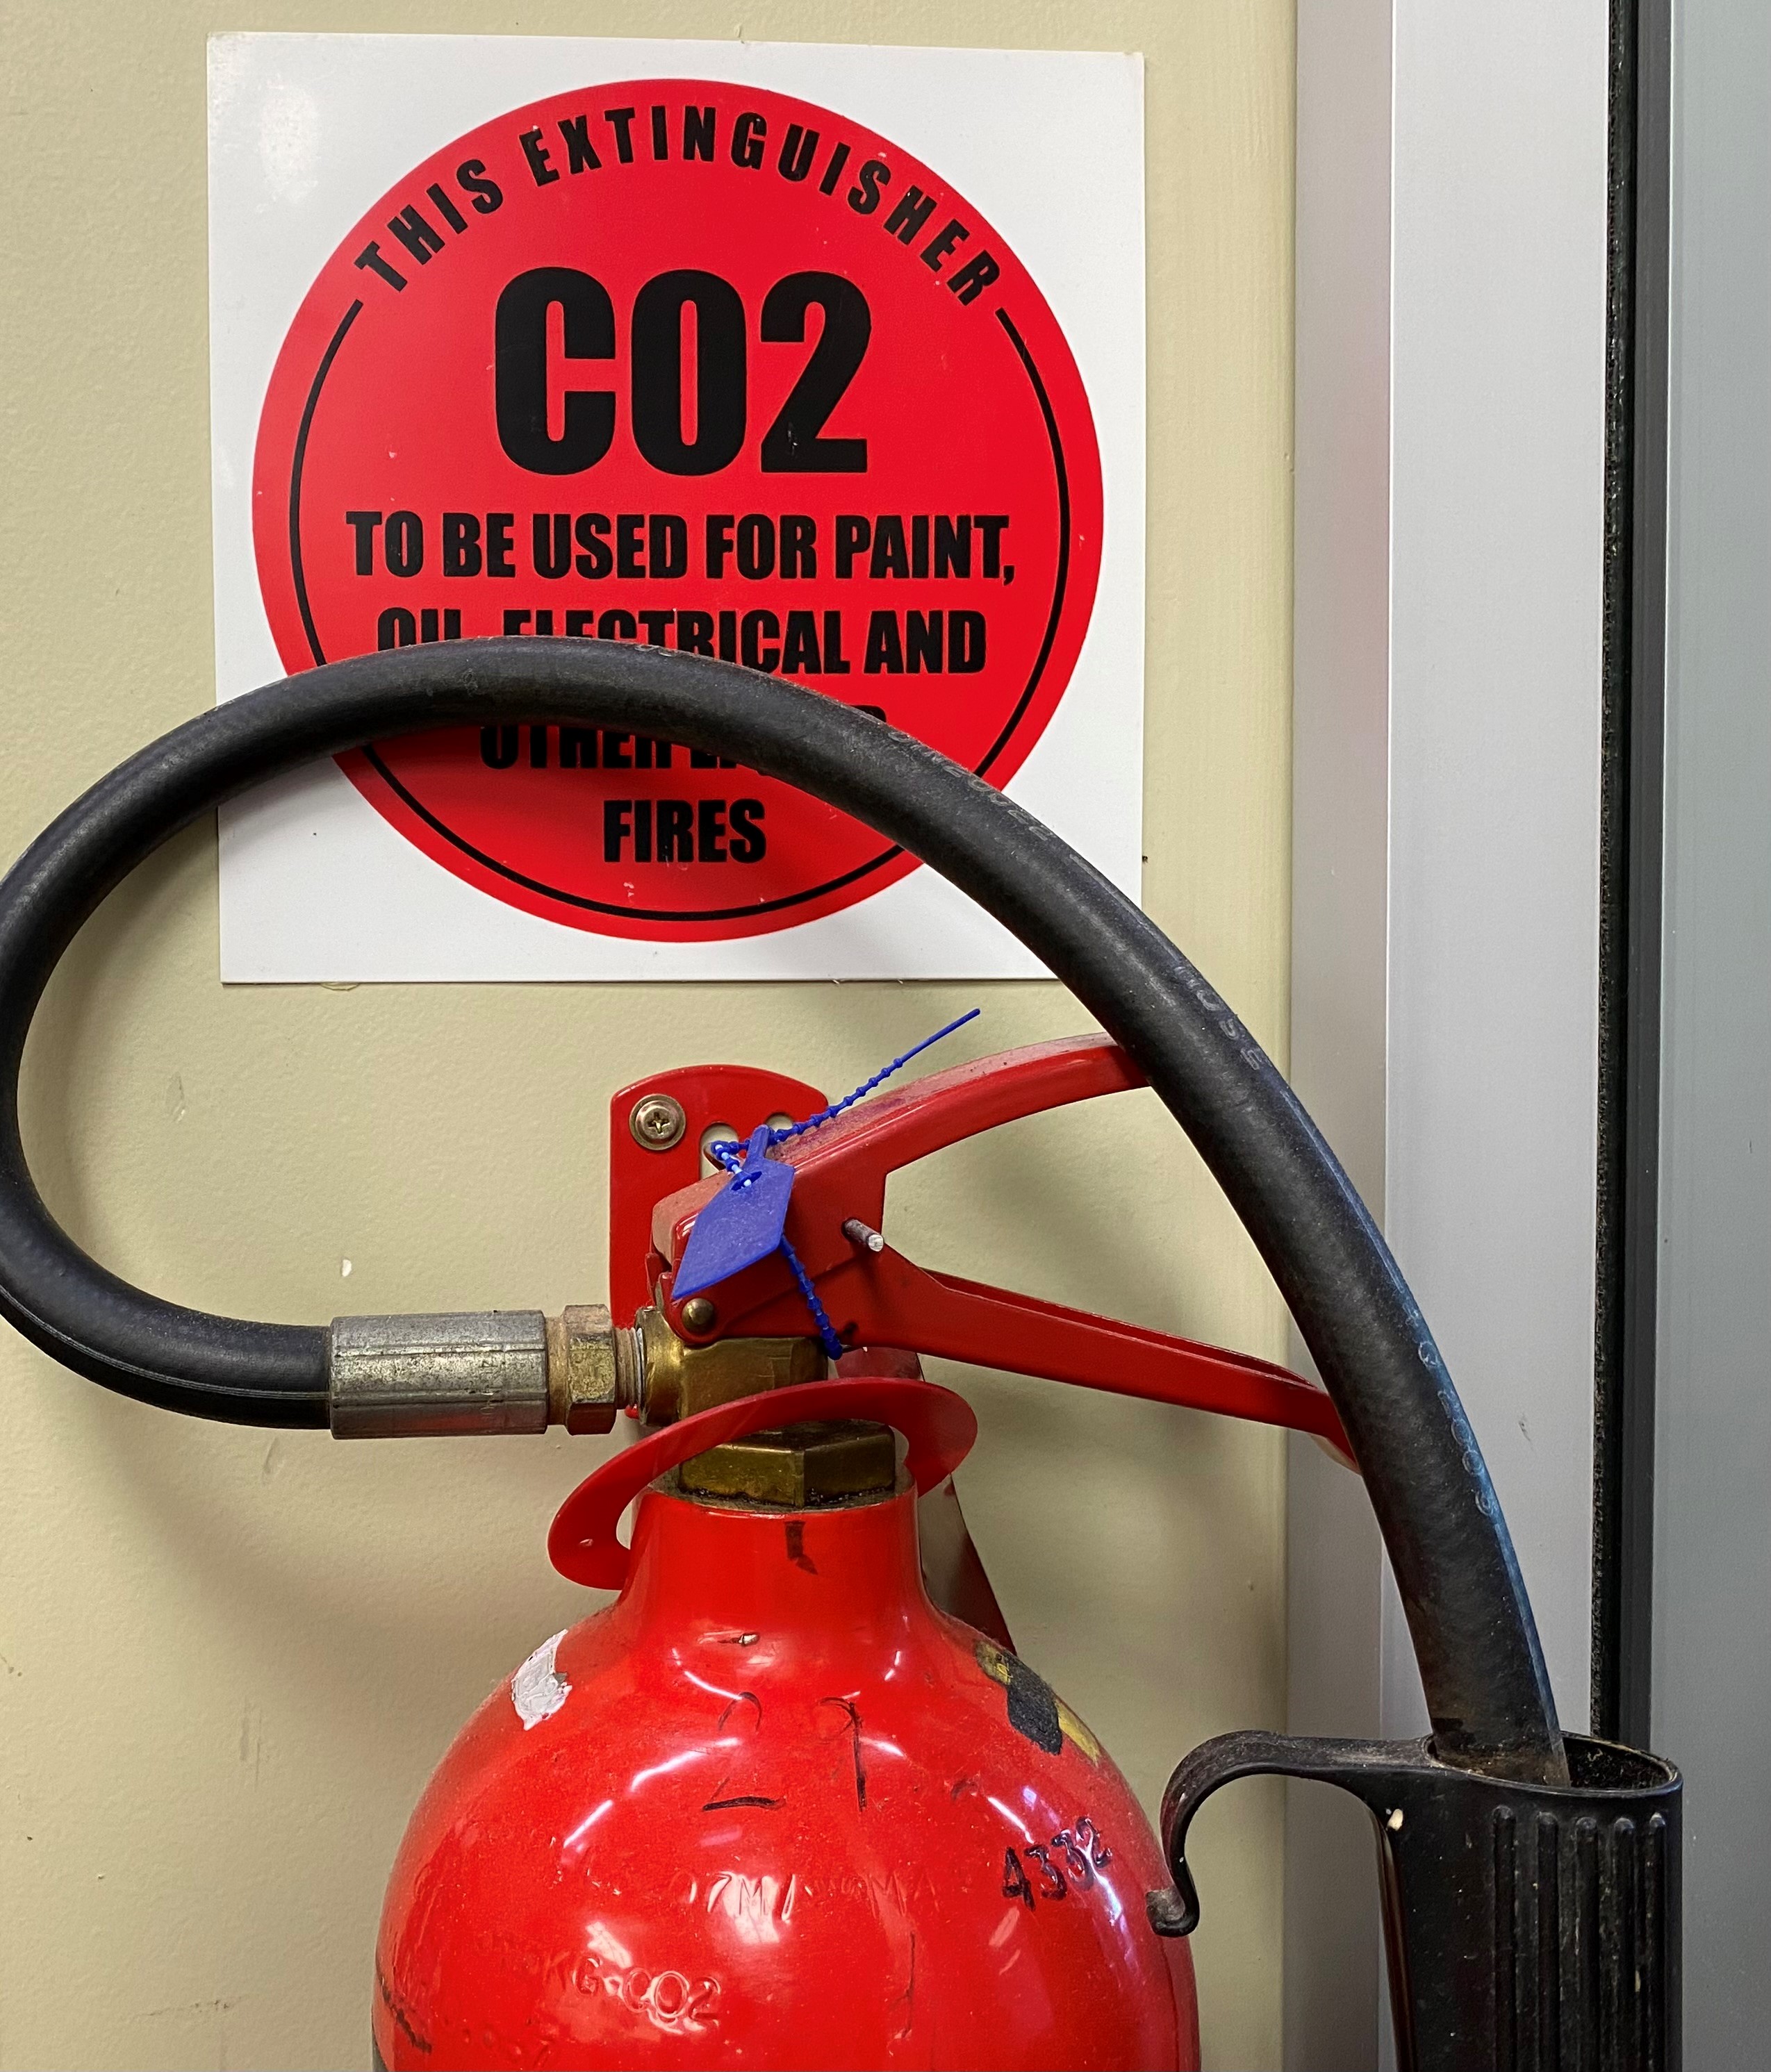 A close up of a red fire extinguisher